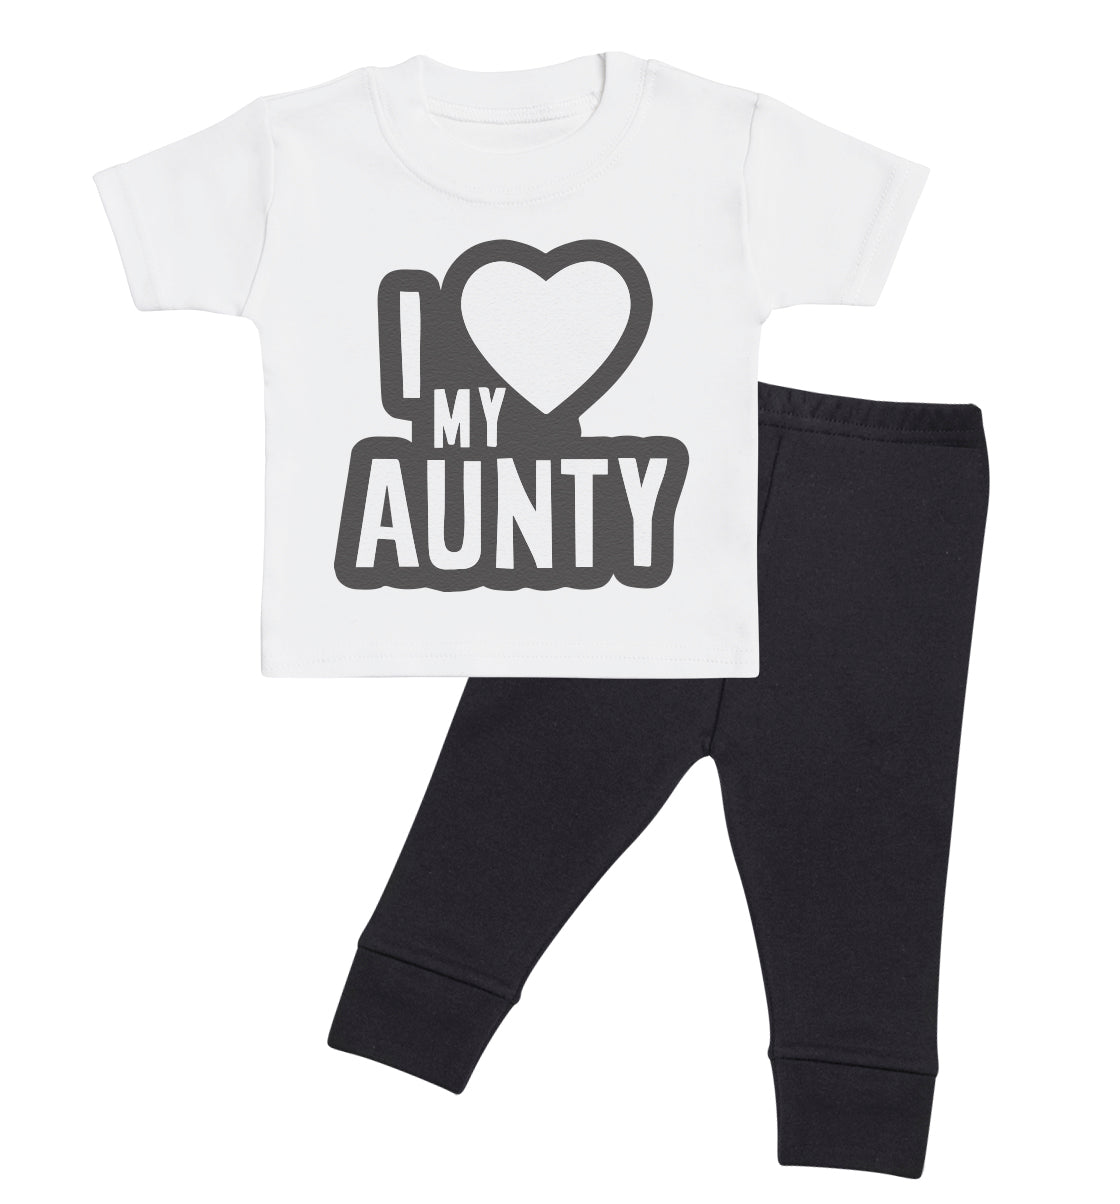 Pick A Family Name - I Heart My Mummy, Auntie, Grandad and more - Baby Outfit Set